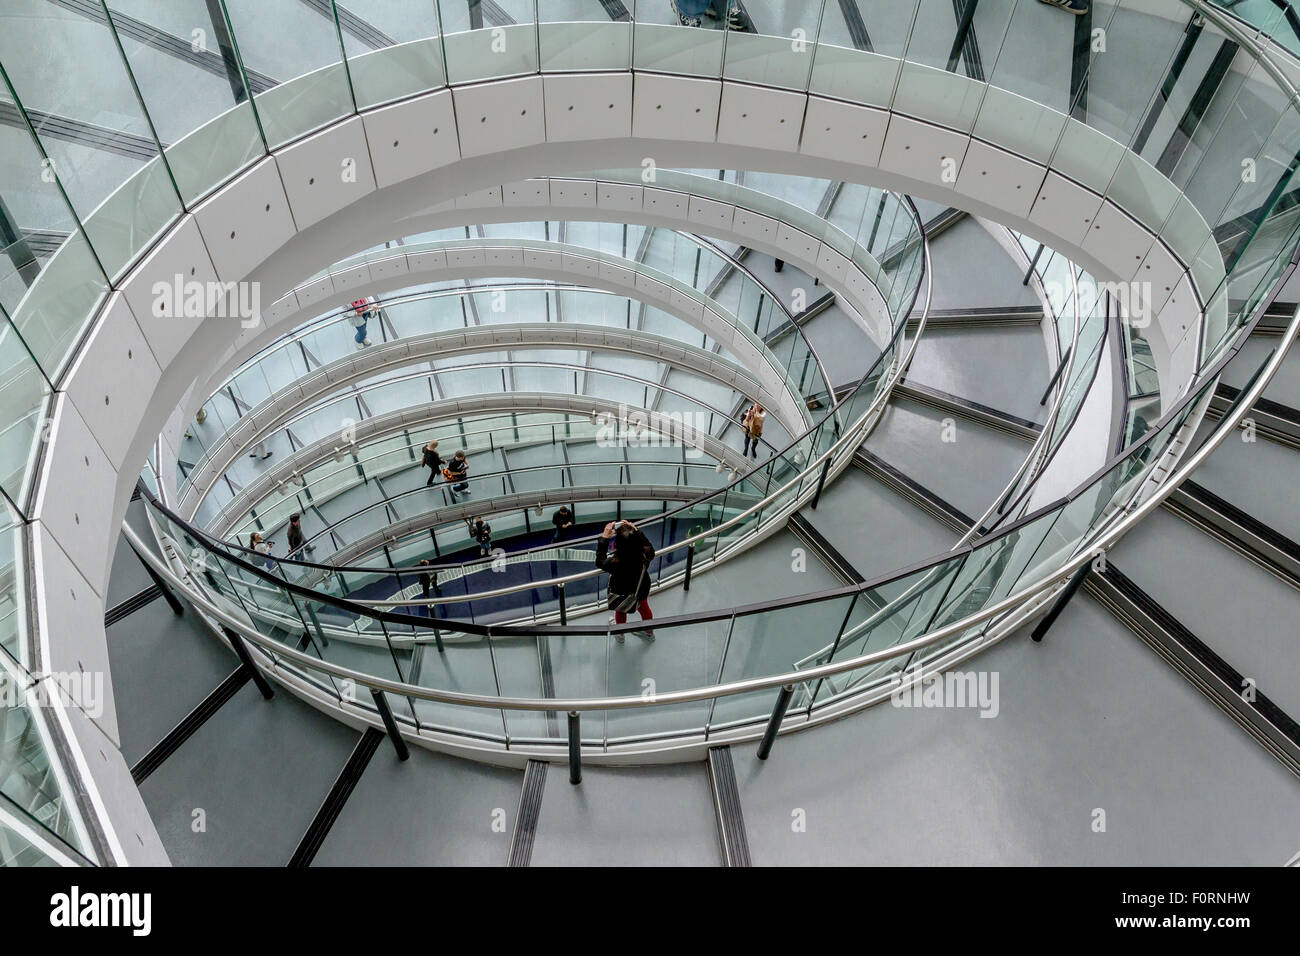 The interior spiral staircase at London City Hall which is the headquarters of the Greater London Authority (GLA) , London, UK Stock Photo